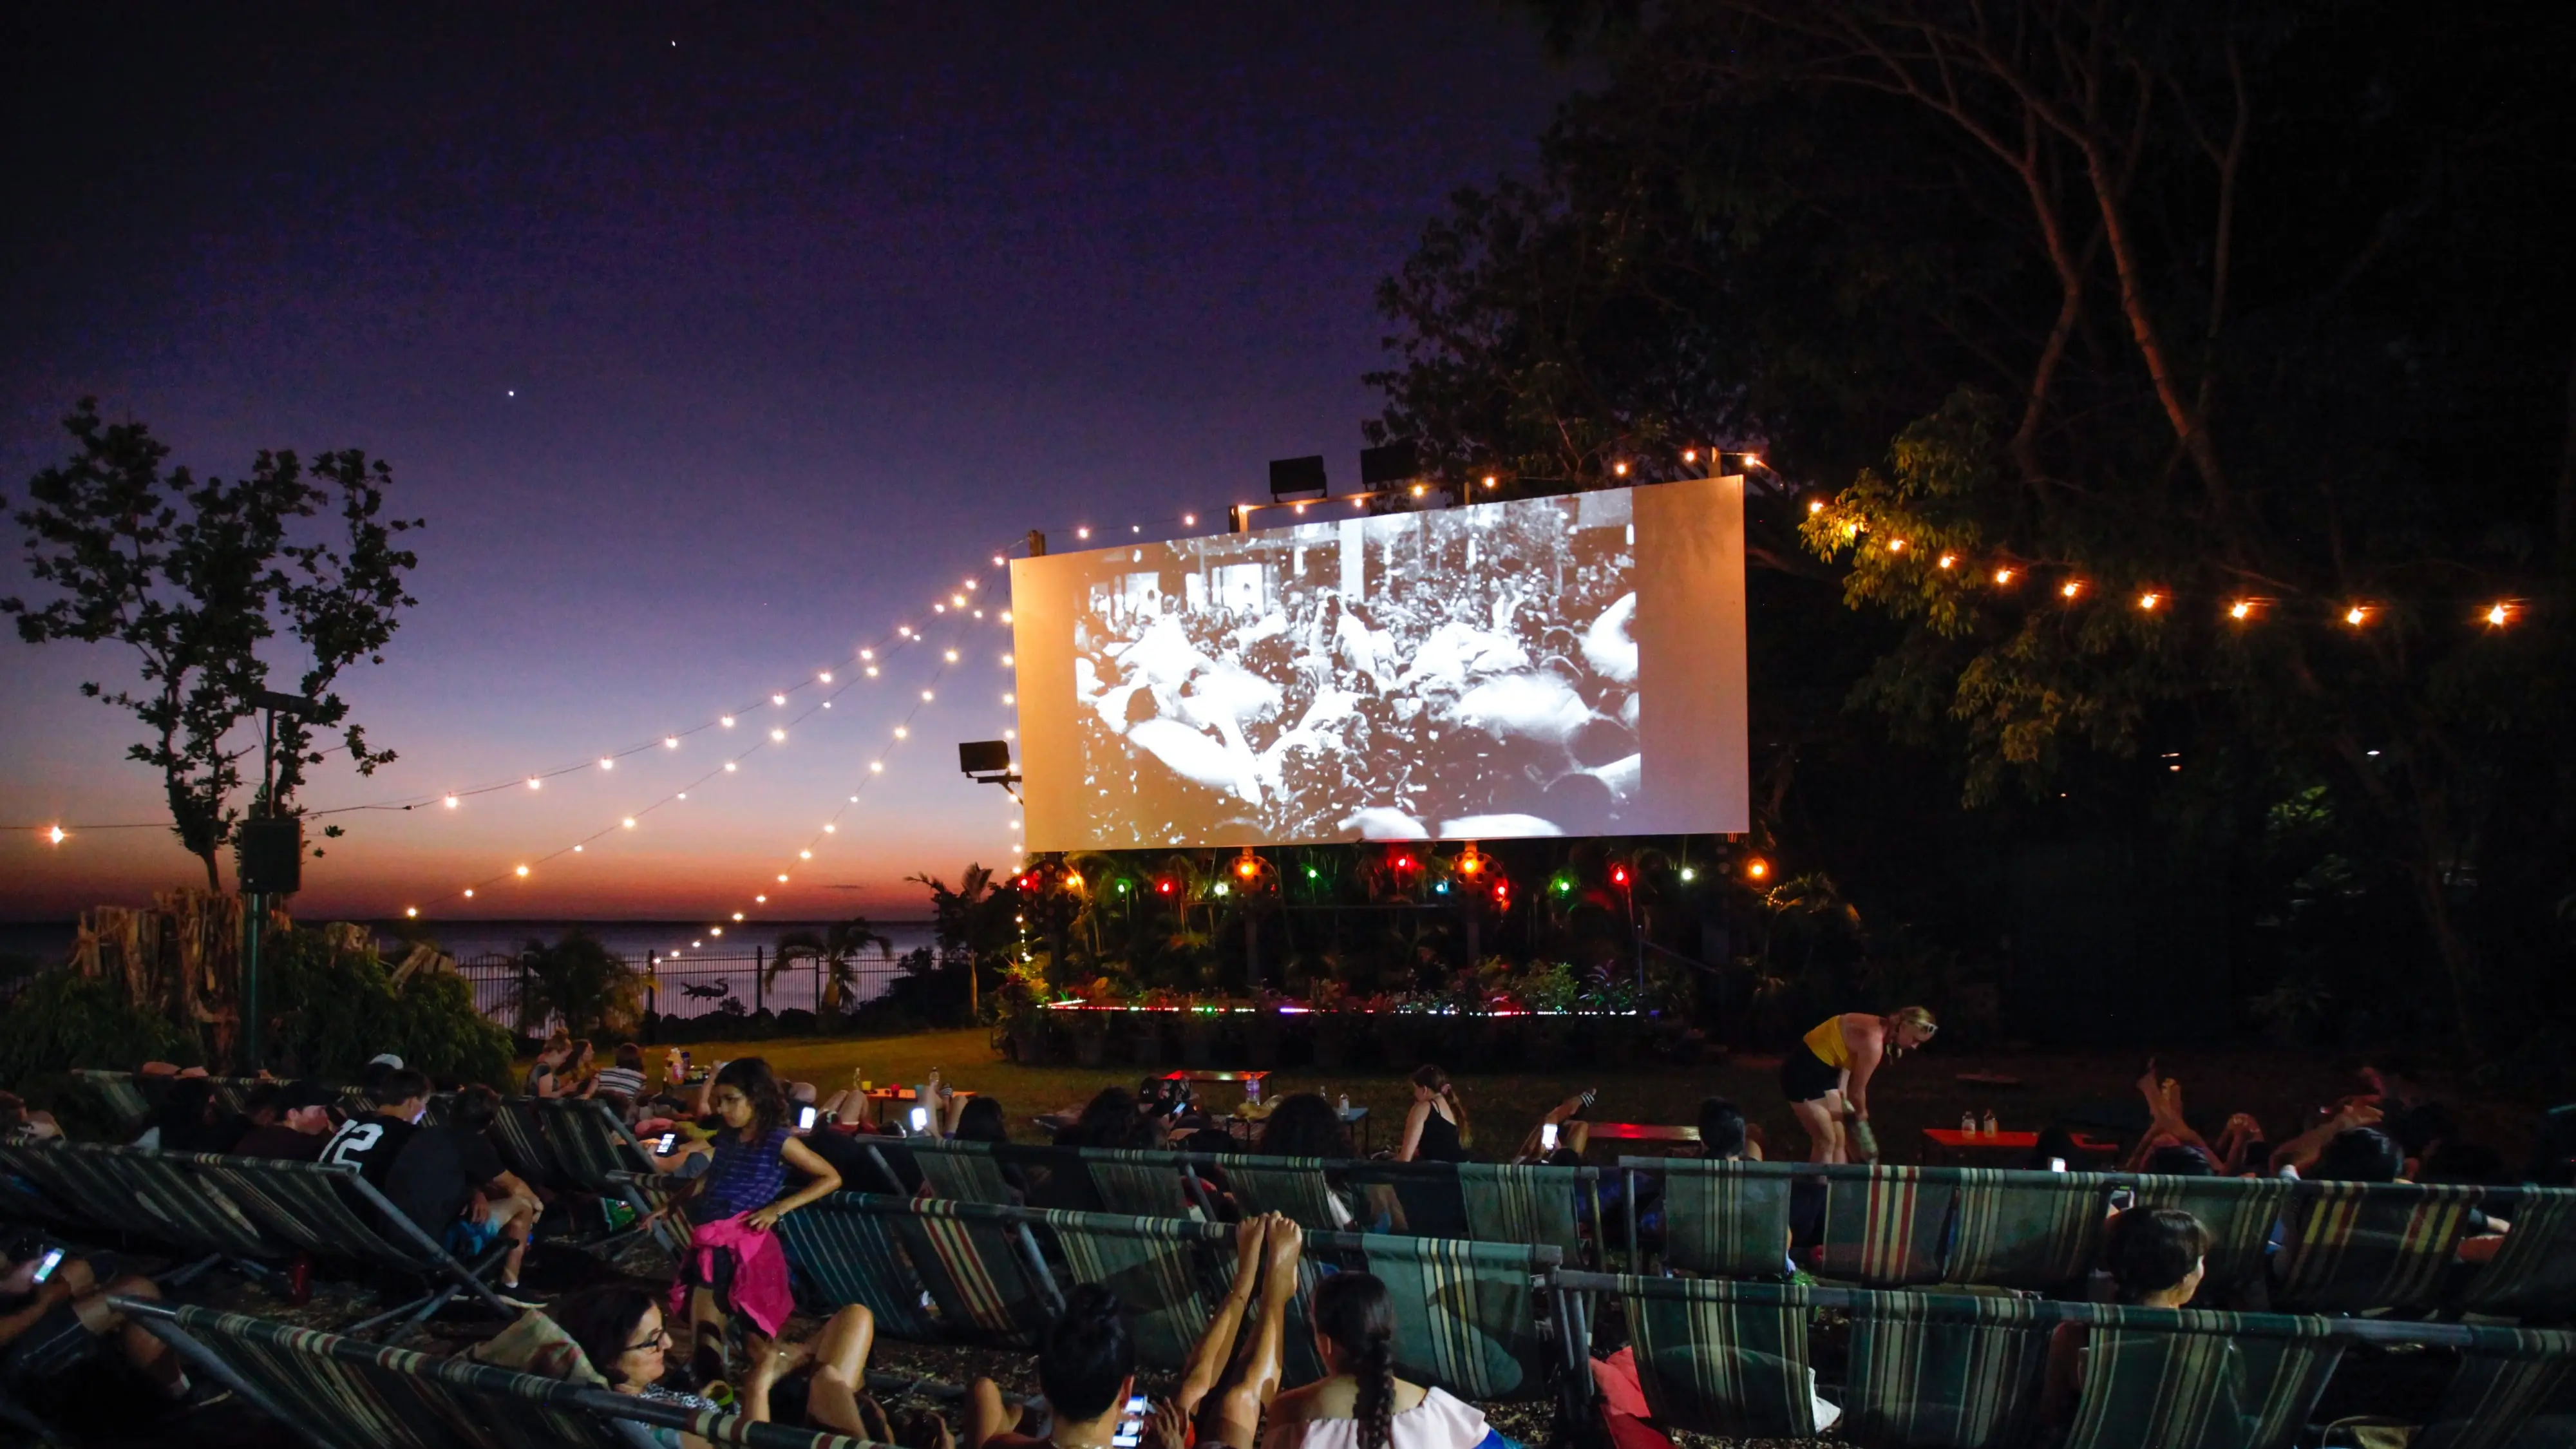 People at an outdoor movie screening at Darwin's Deckchair Cinema at sunset. Image credit: Tourism NT/Friederike Franze